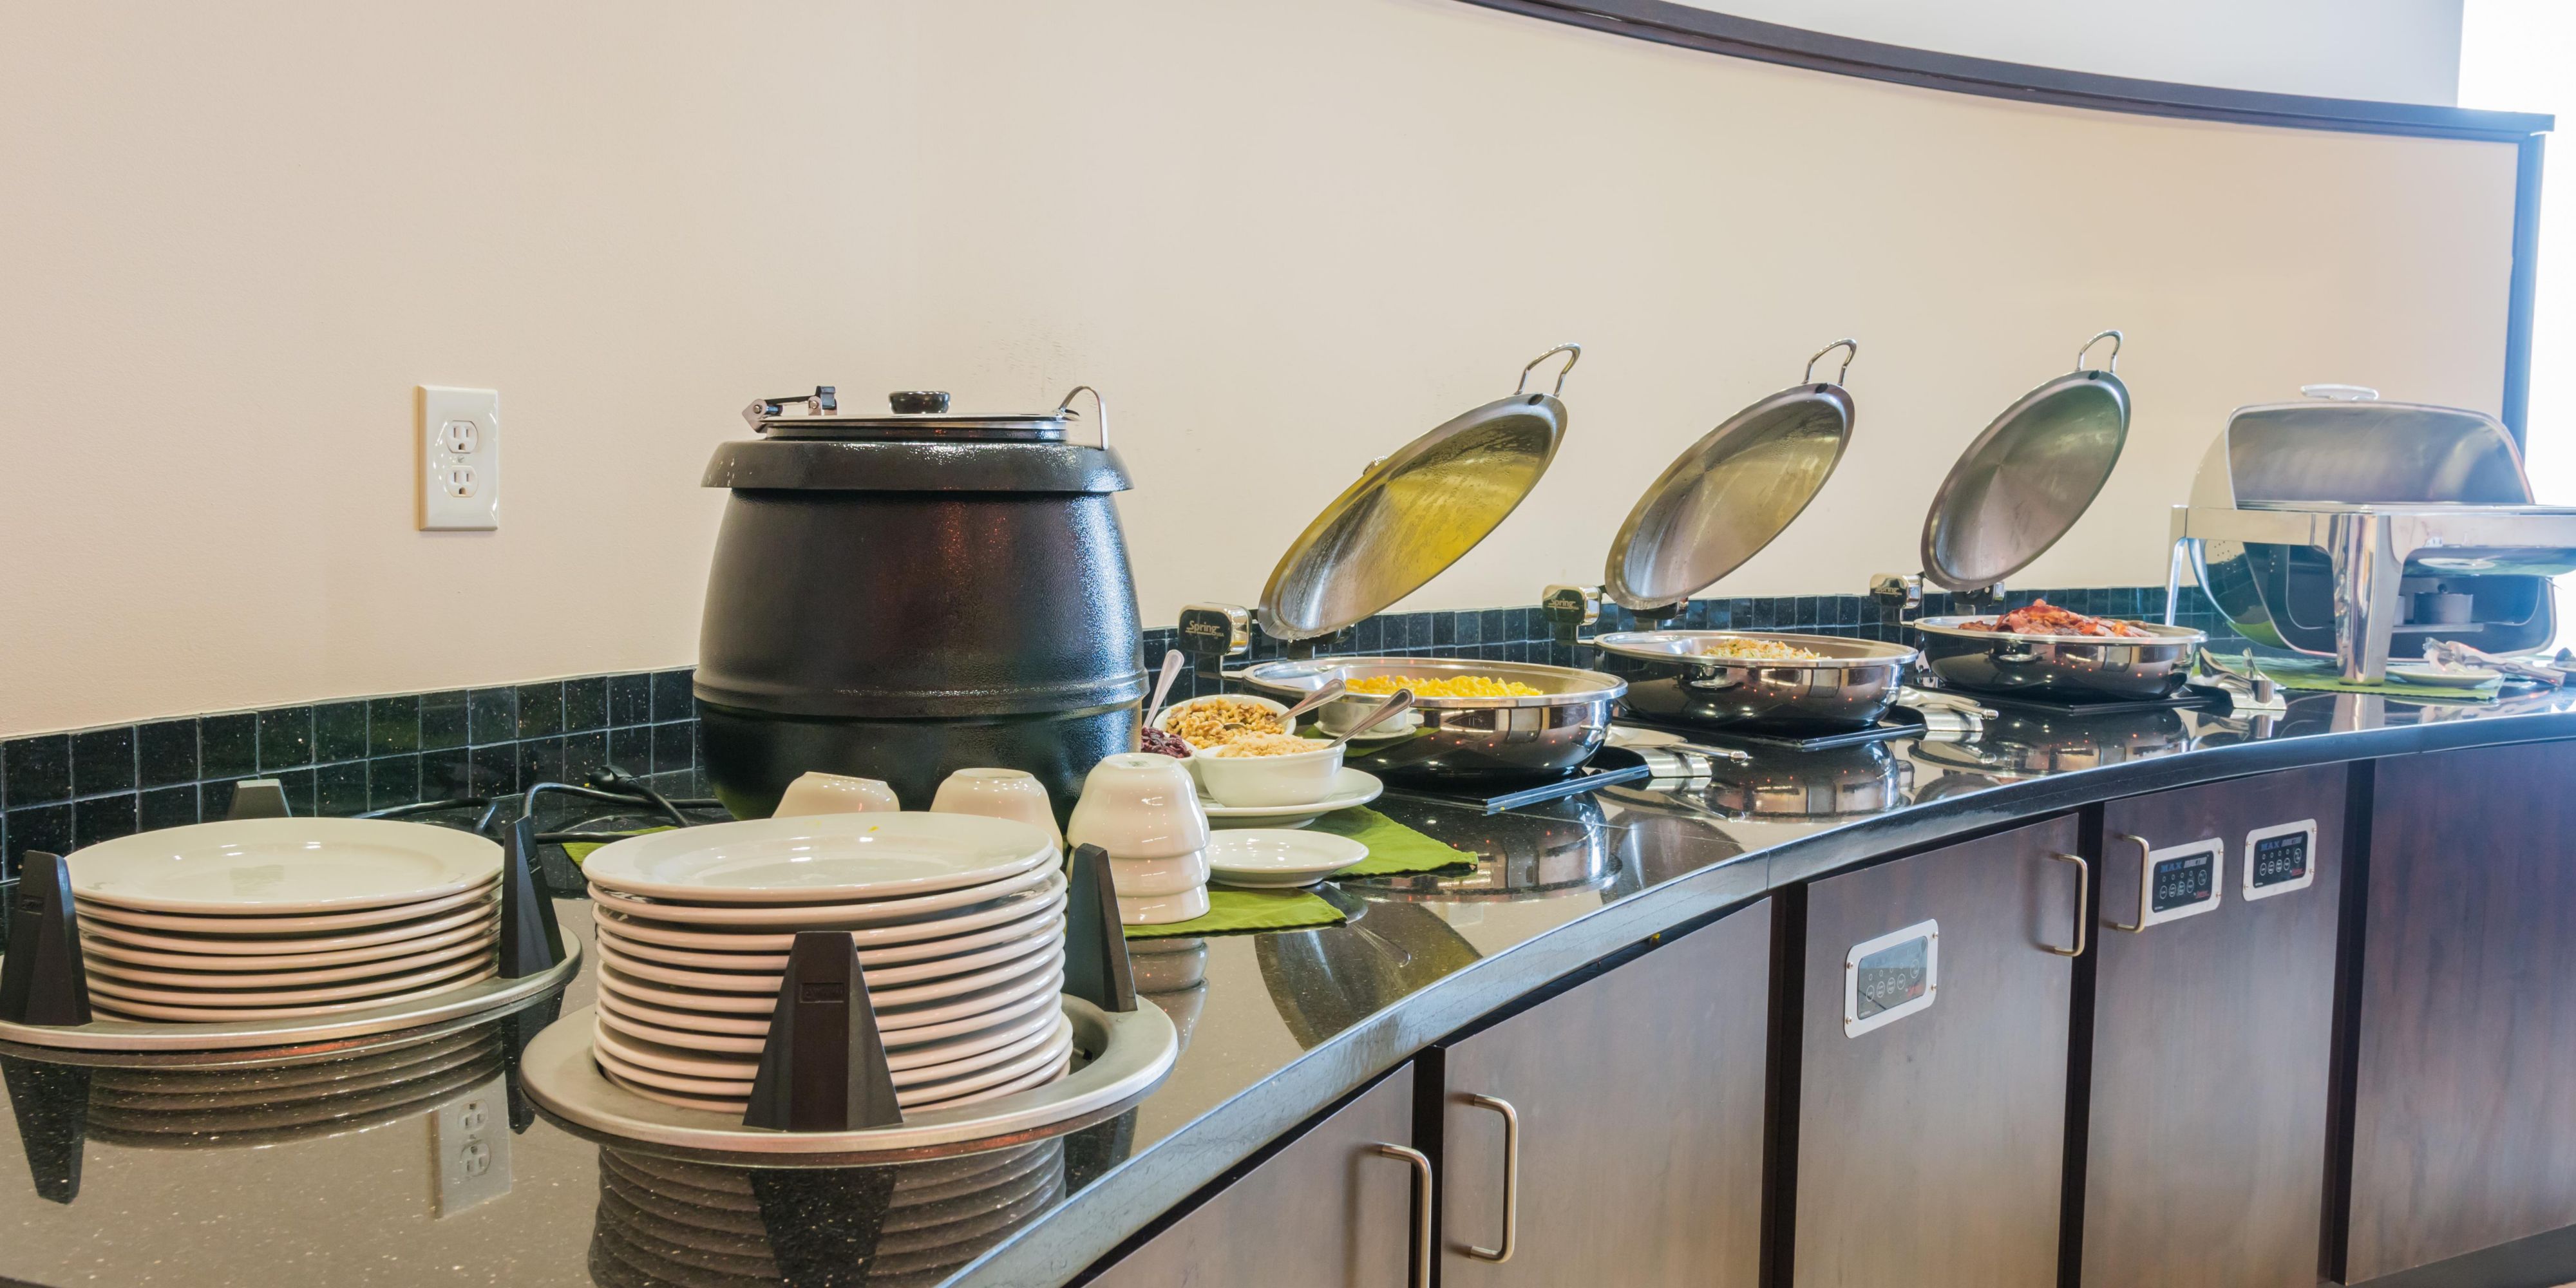 Breakfast buffet with many delicious options.